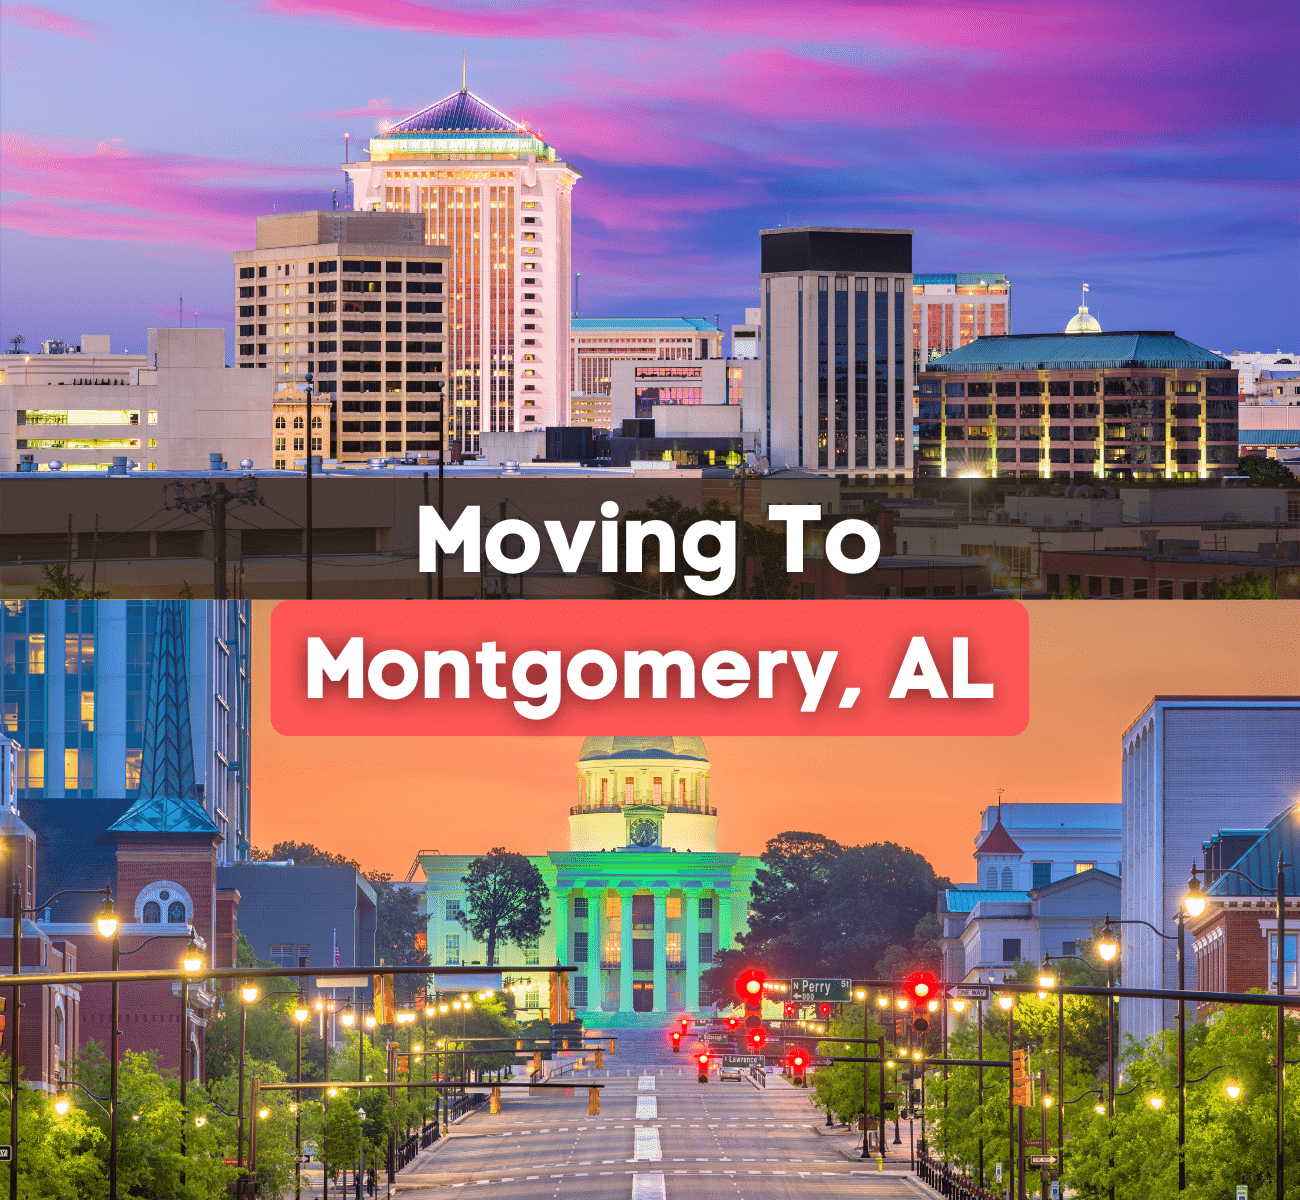 Moving to Montgomery, AL - downtown Montgomery and capitol building at sunset